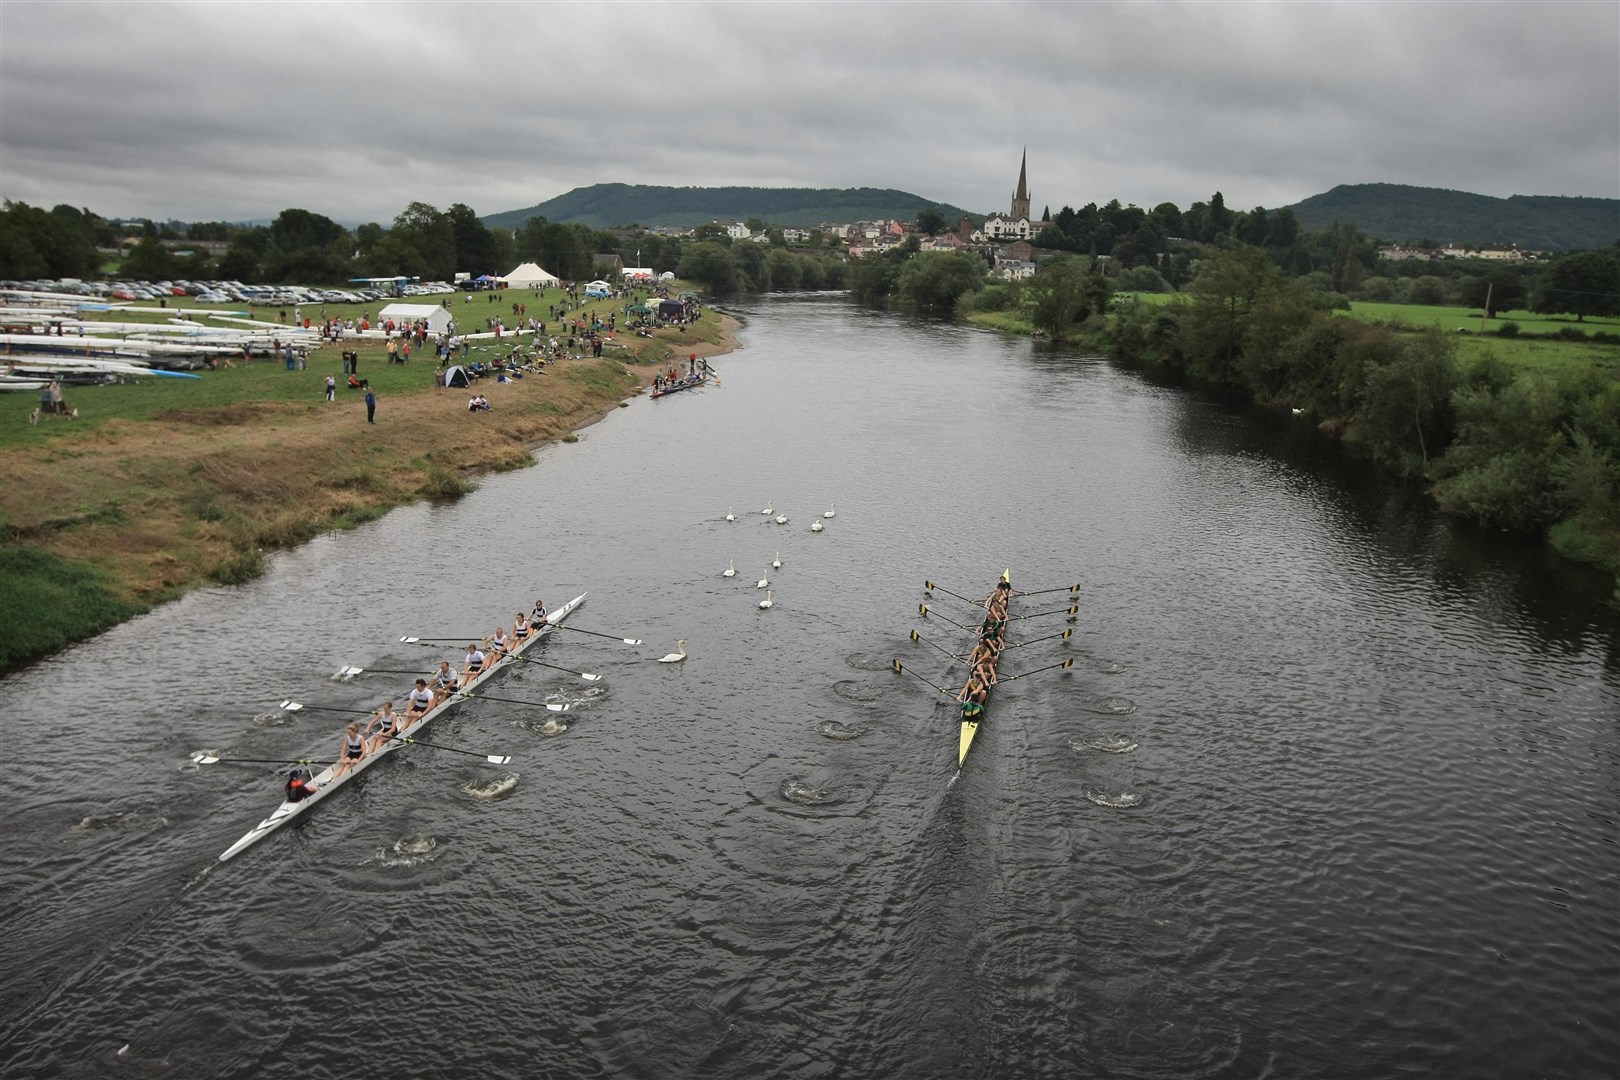 The River Wye flows for 150 miles and forms part of the border between England and Wales (David Jones/PA)